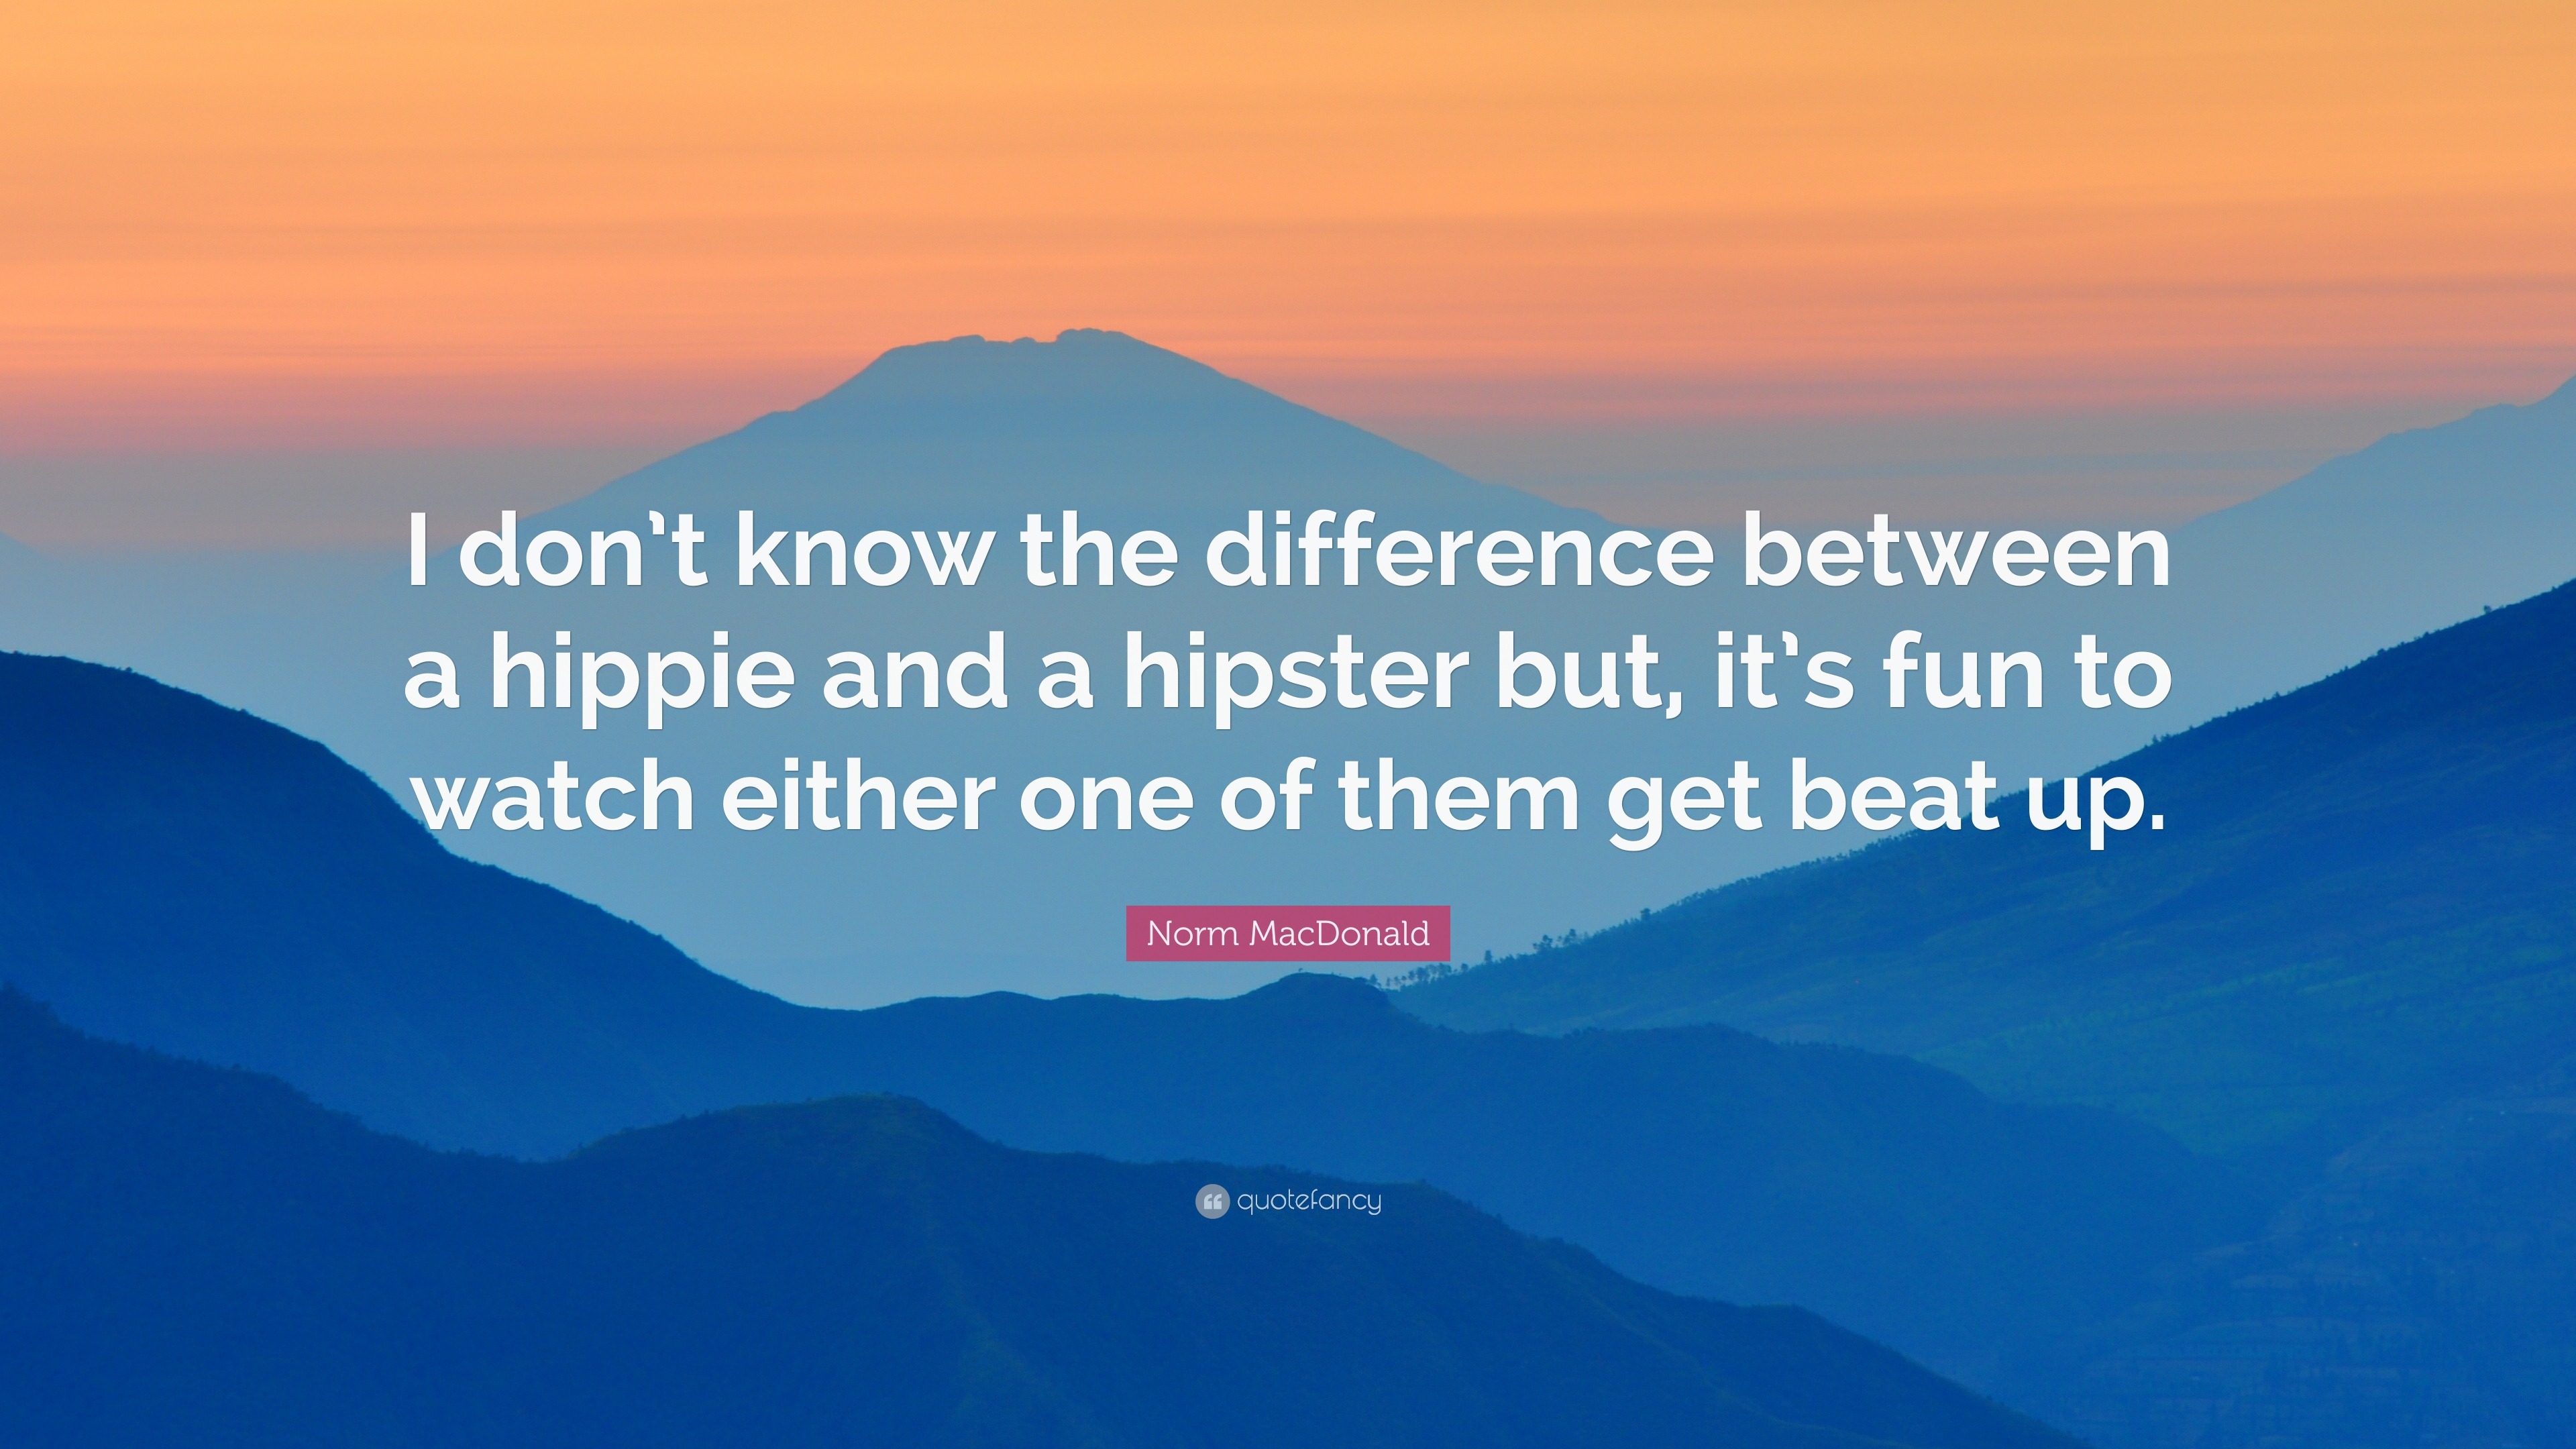  Hipster Quotes  40 wallpapers Quotefancy